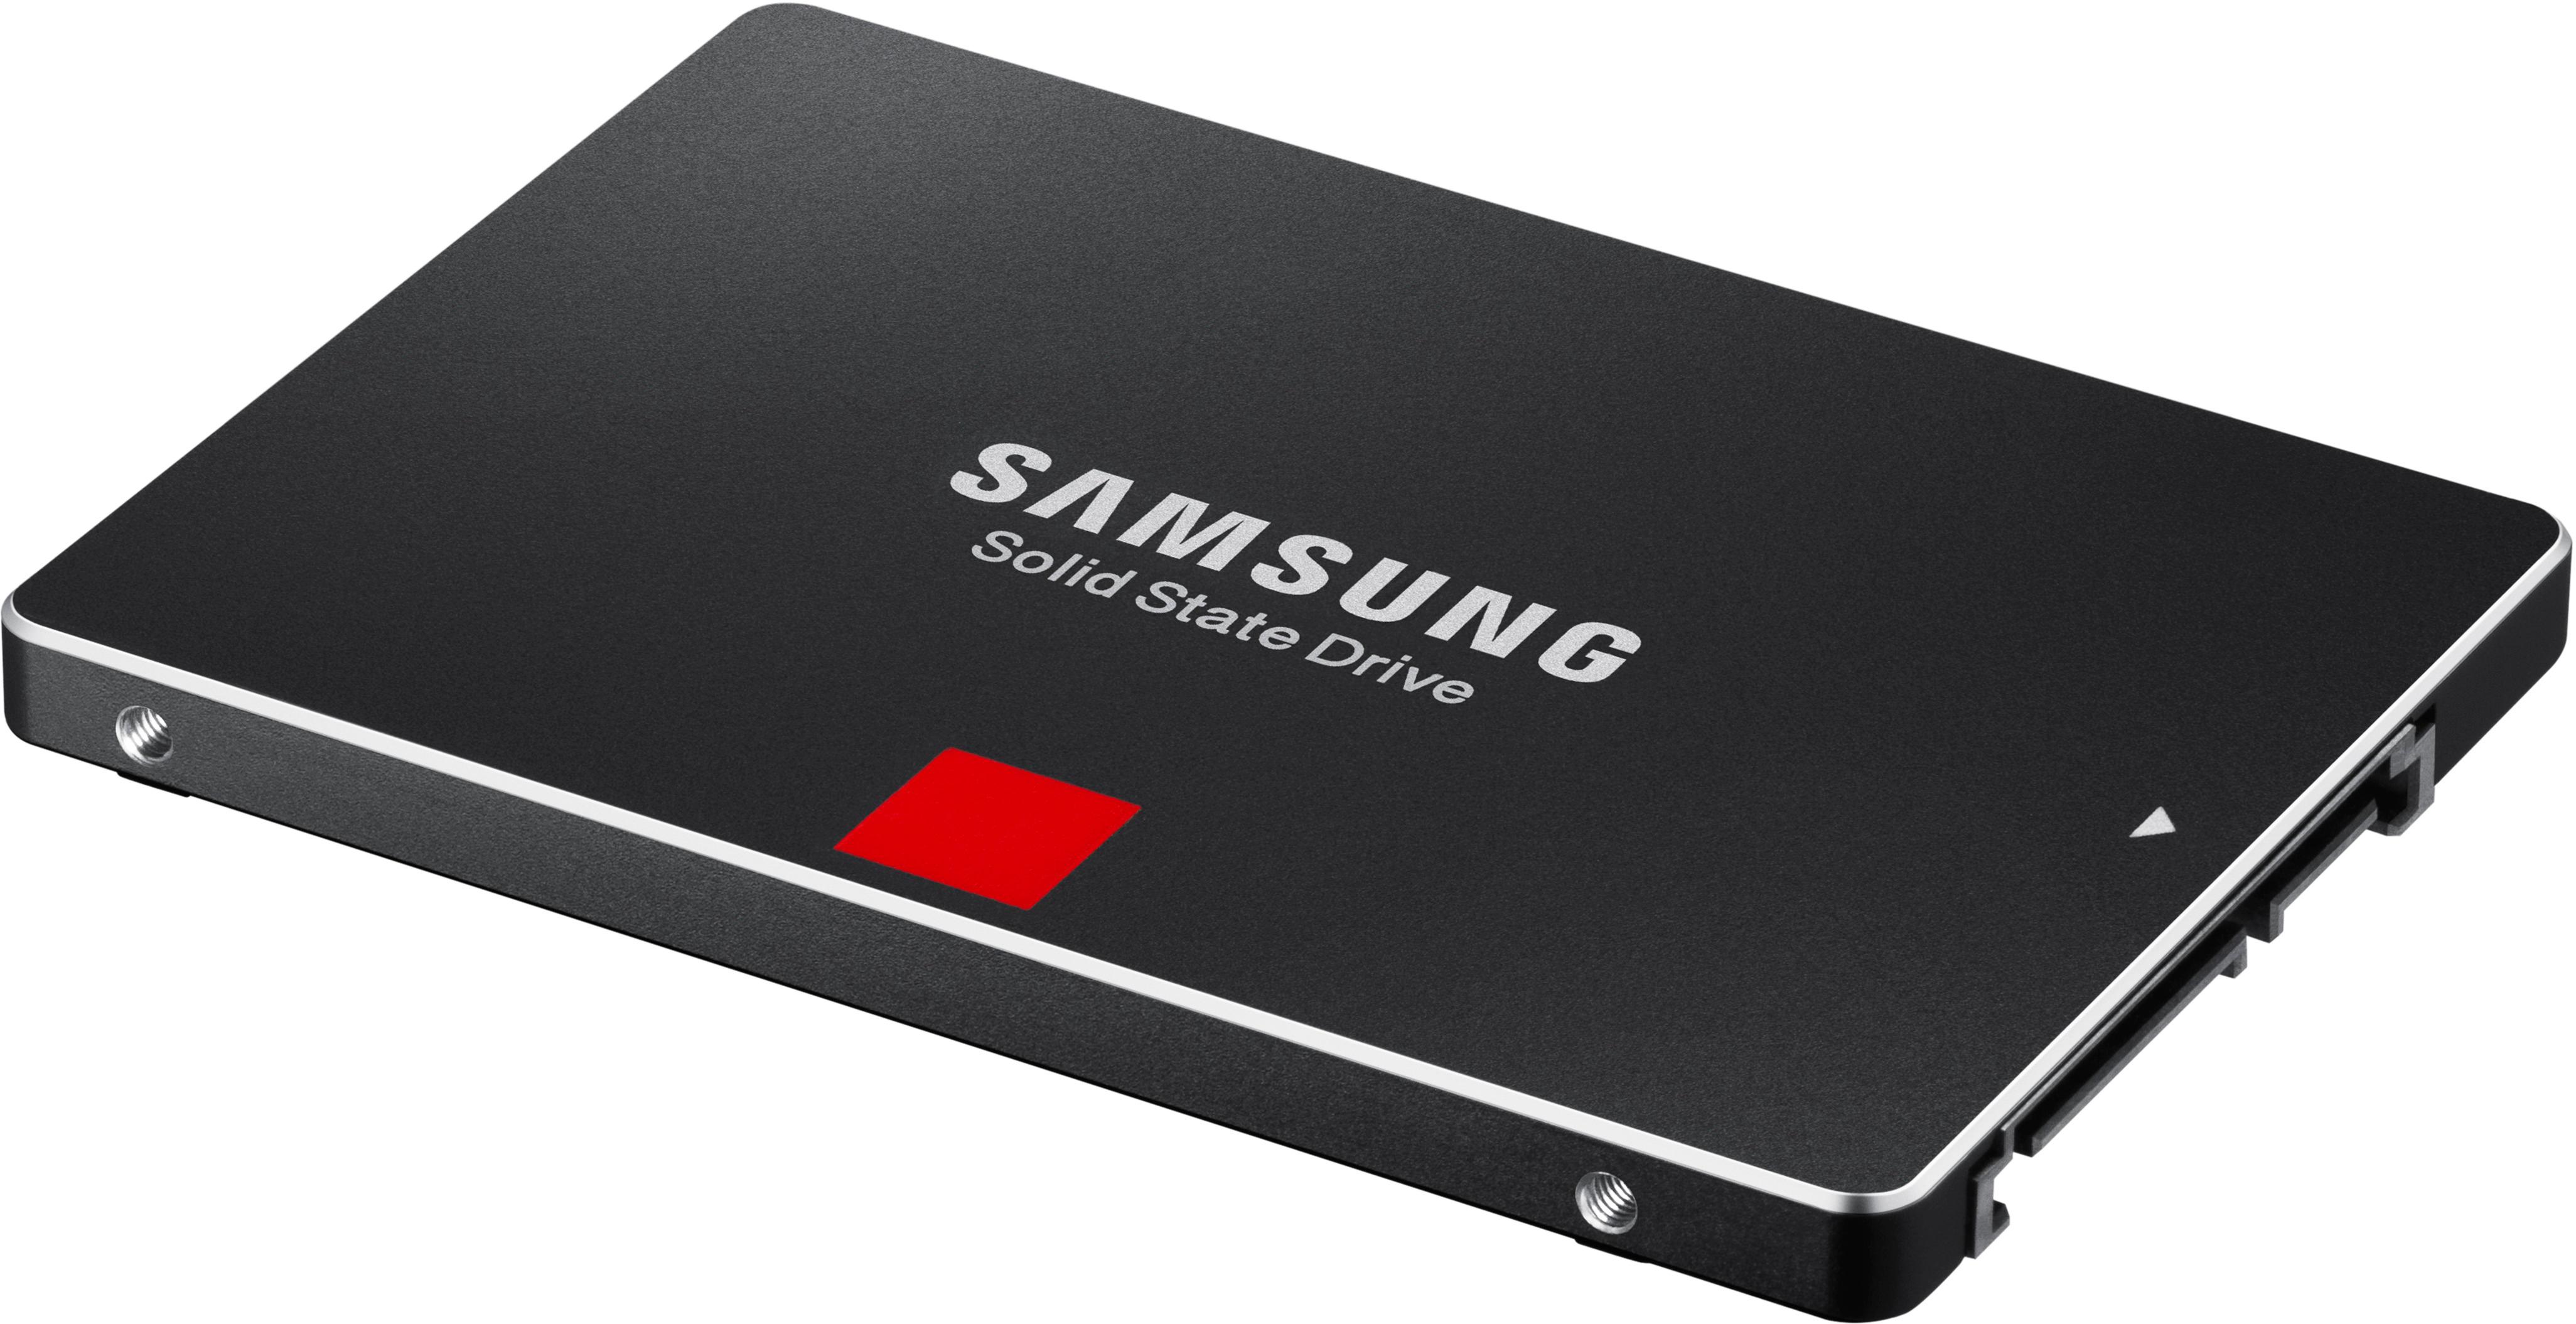 Exactly It's cheap Normalization Best Buy: Samsung 860 PRO 512GB SATA 2.5" Internal Solid State Drive  MZ-76P512BW